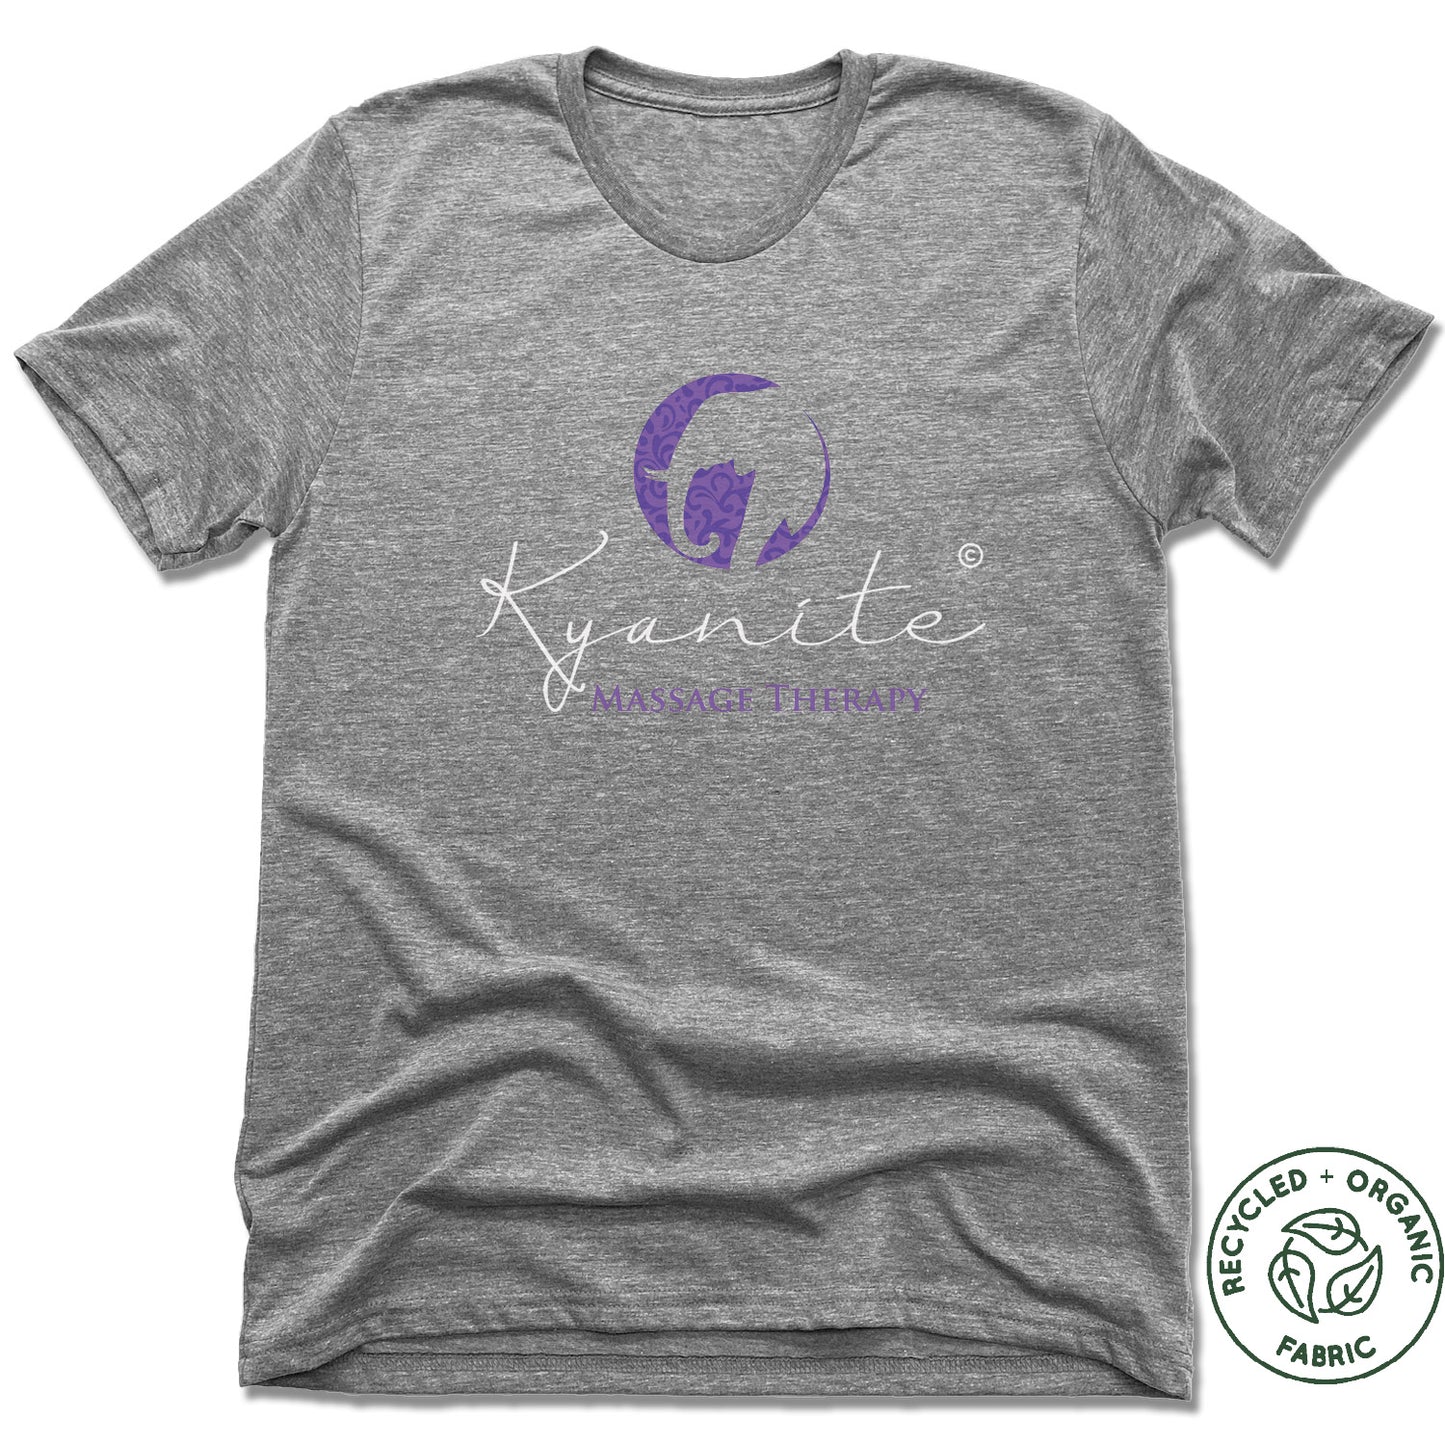 KYANITE MASSAGE THERAPY | UNISEX GRAY Recycled Tri-Blend | COLOR LOGO